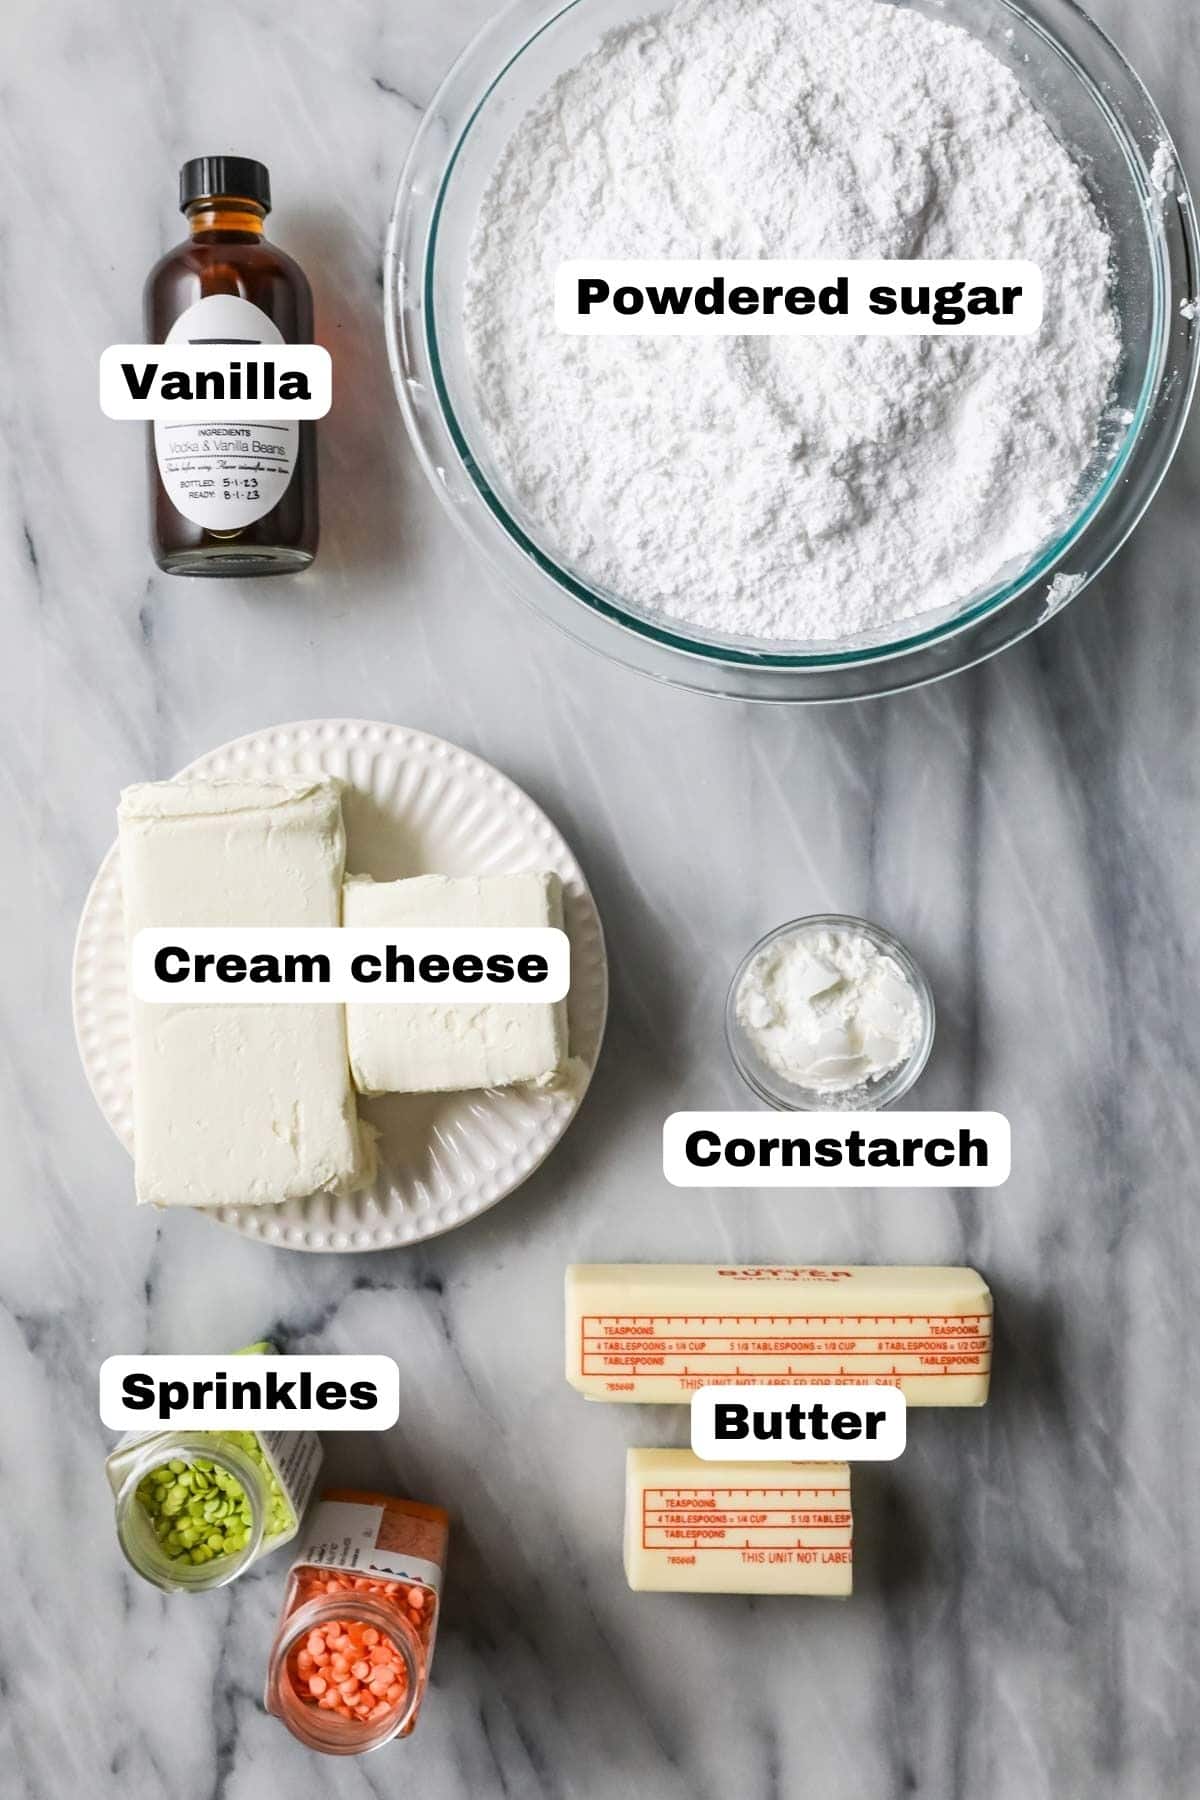 Overhead view of labelled ingredients including powdered sugar, cream cheese, butter, and more.